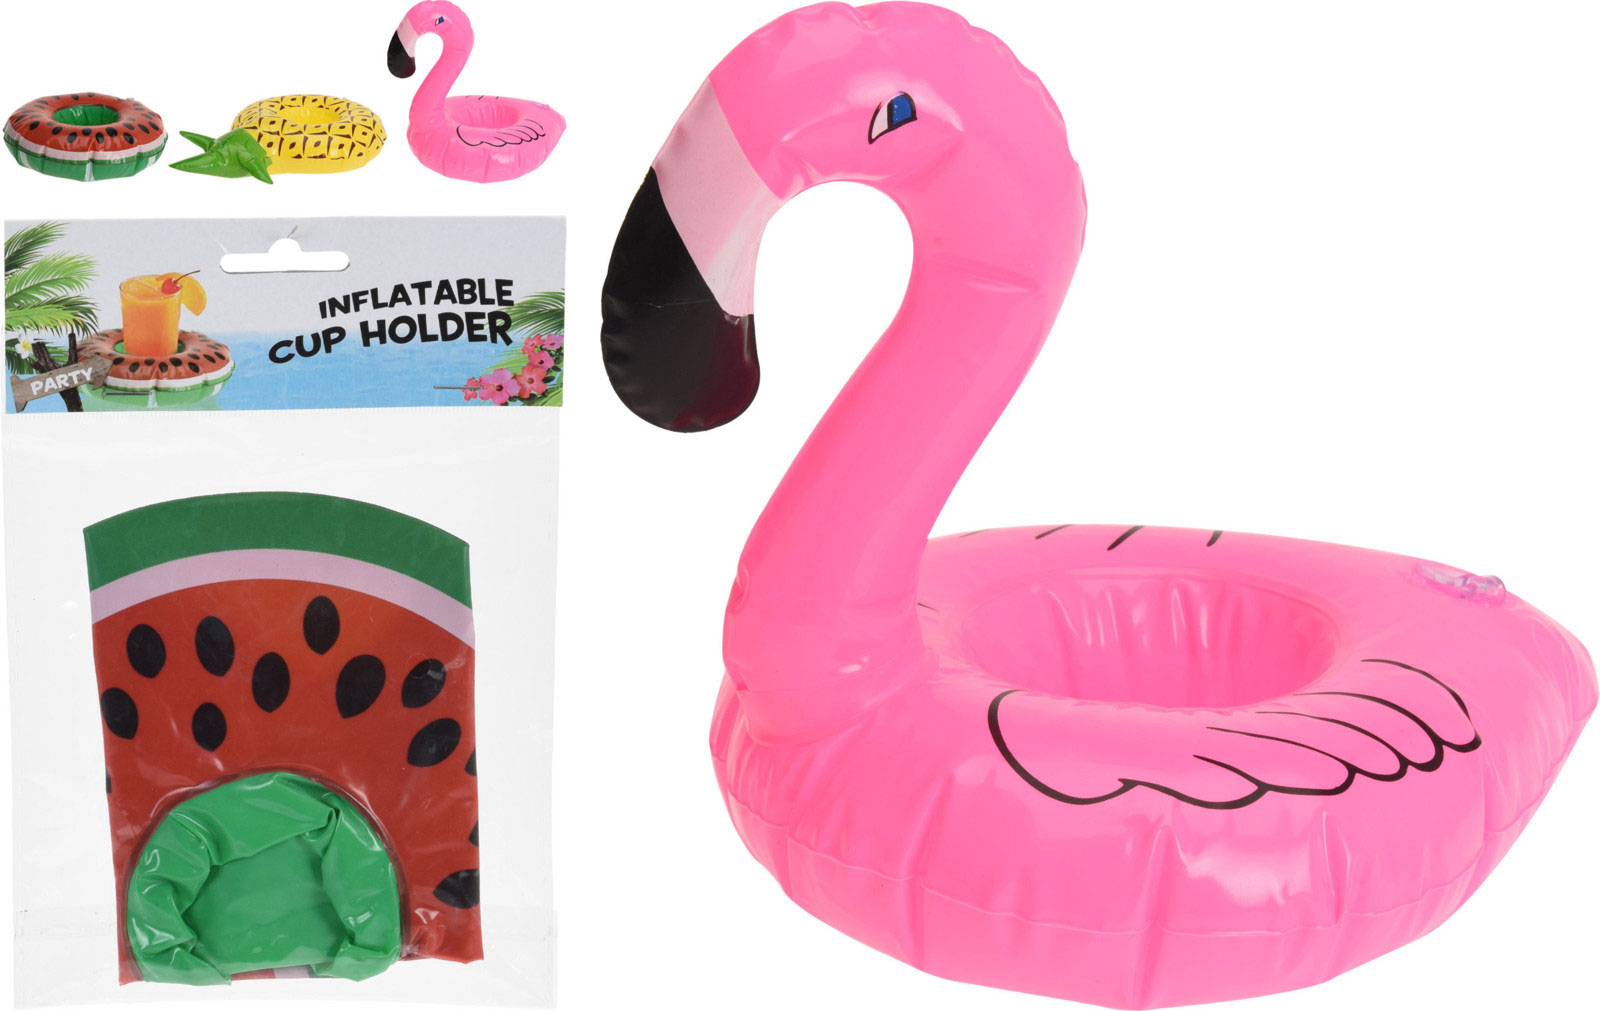 CUP HOLDER INFLATABLE 3 ASSORTED DESIGNS